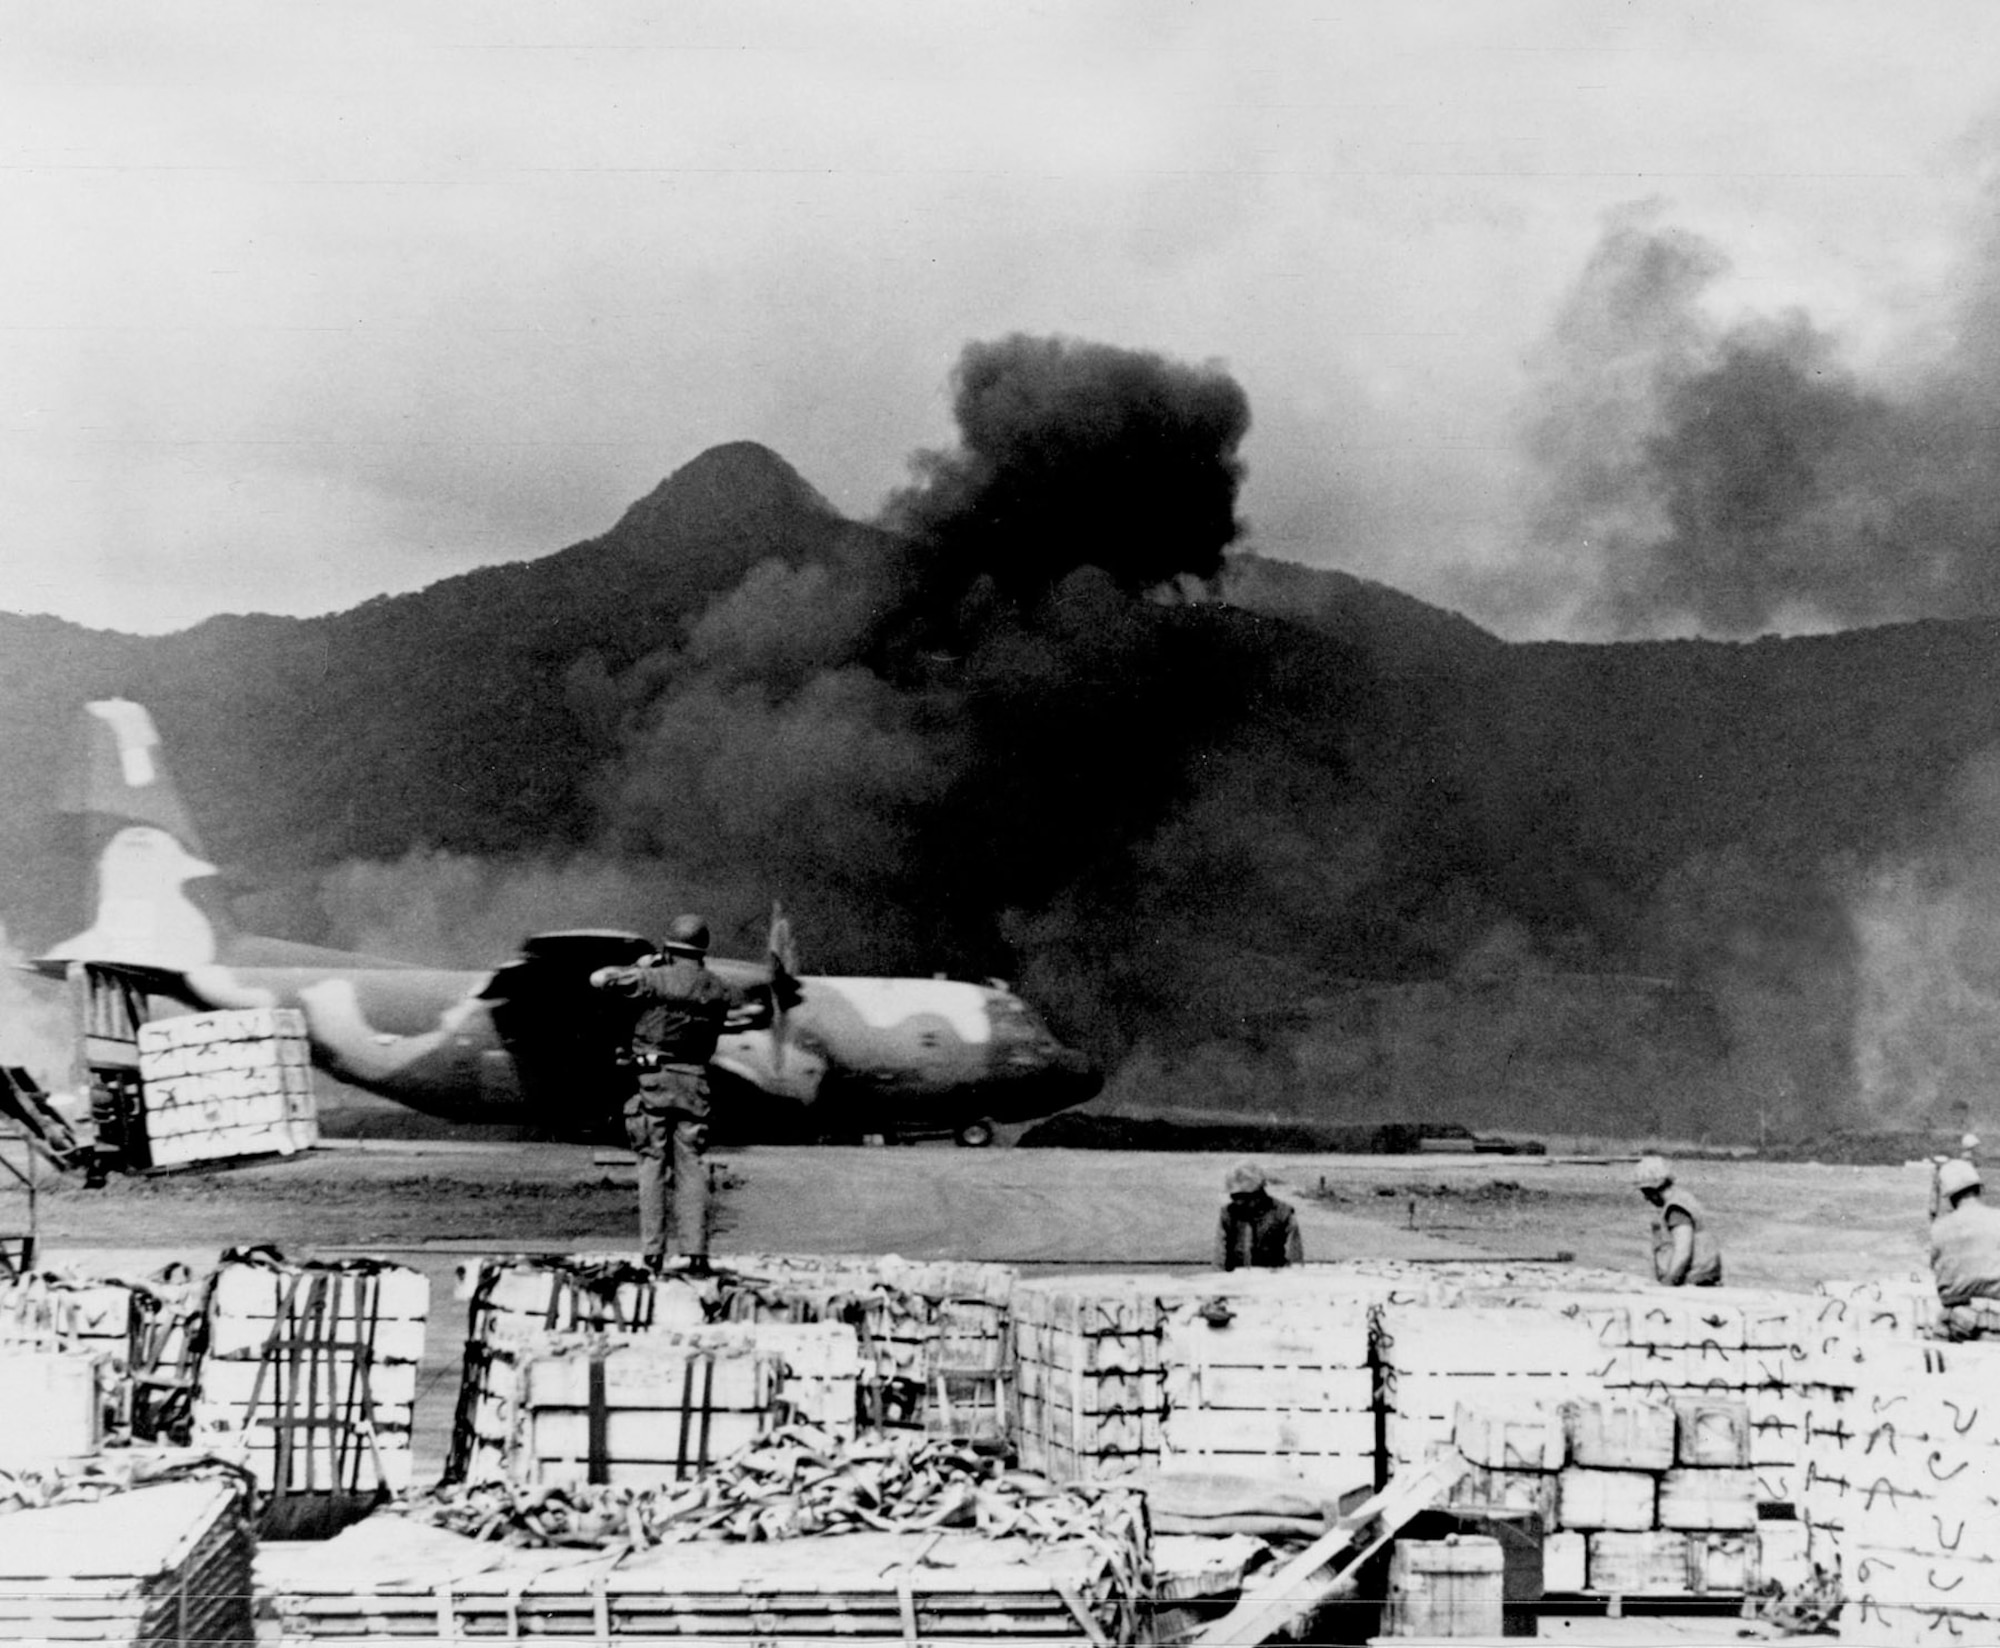 USAF C-130 taking off from Khe Sanh, 1968. (U.S. Air Force photo)